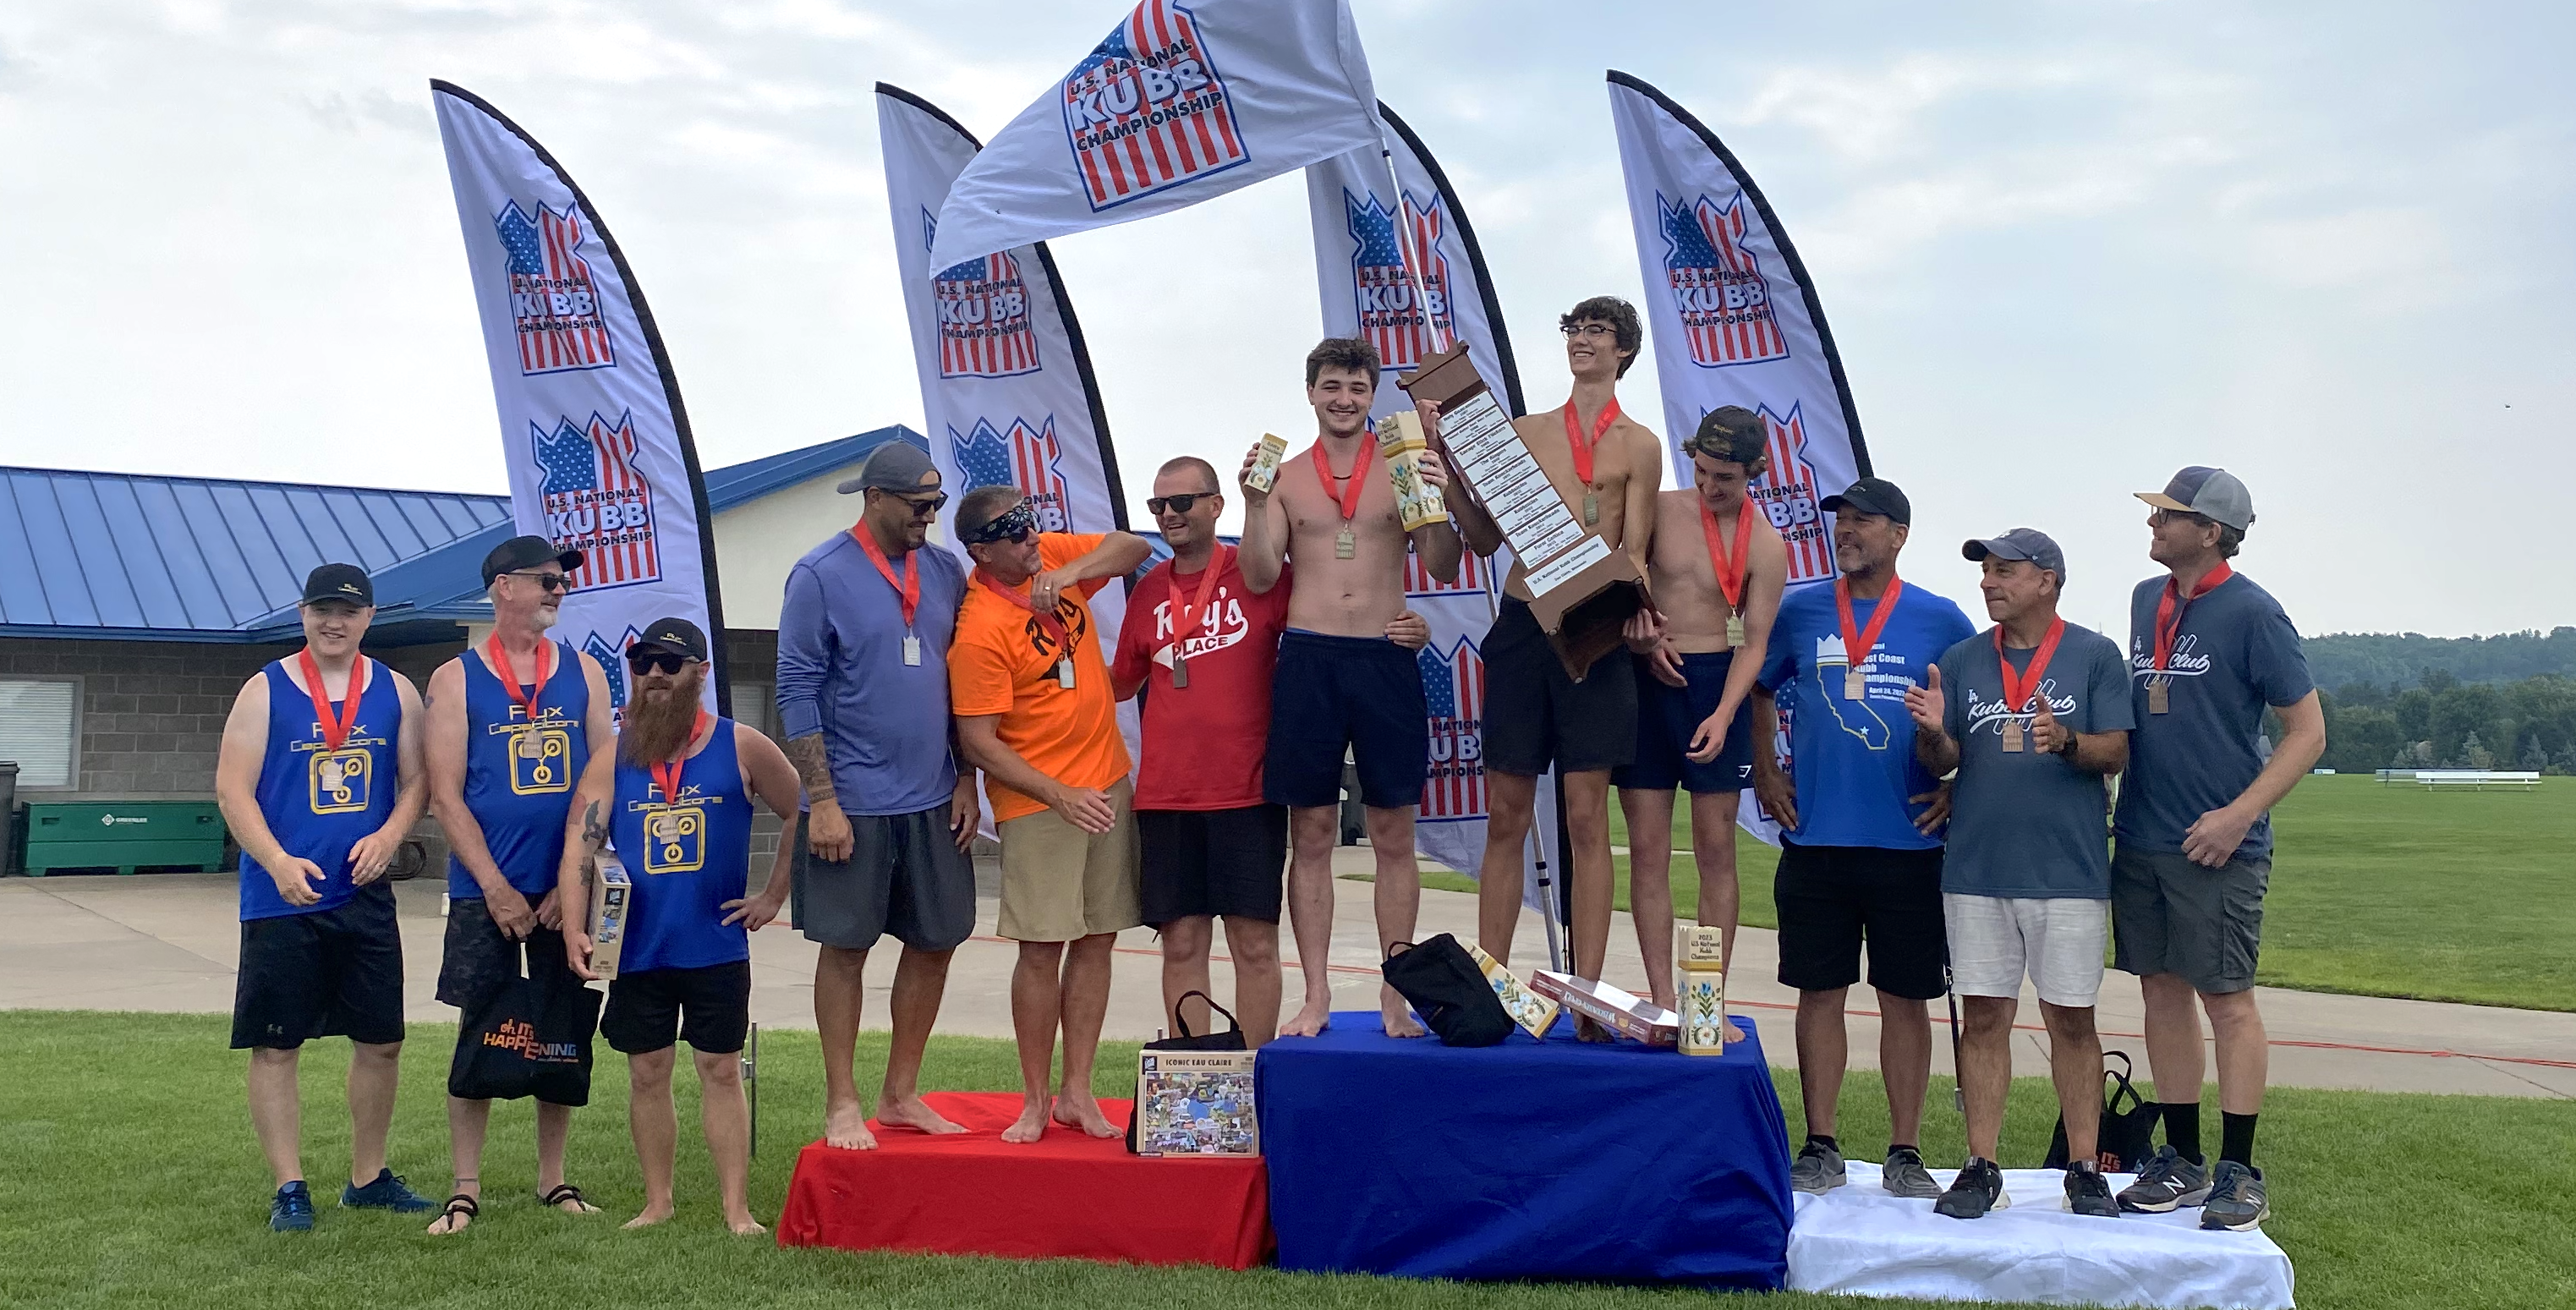 Beverly Drillbillies take 3rd Place at US National Championships!